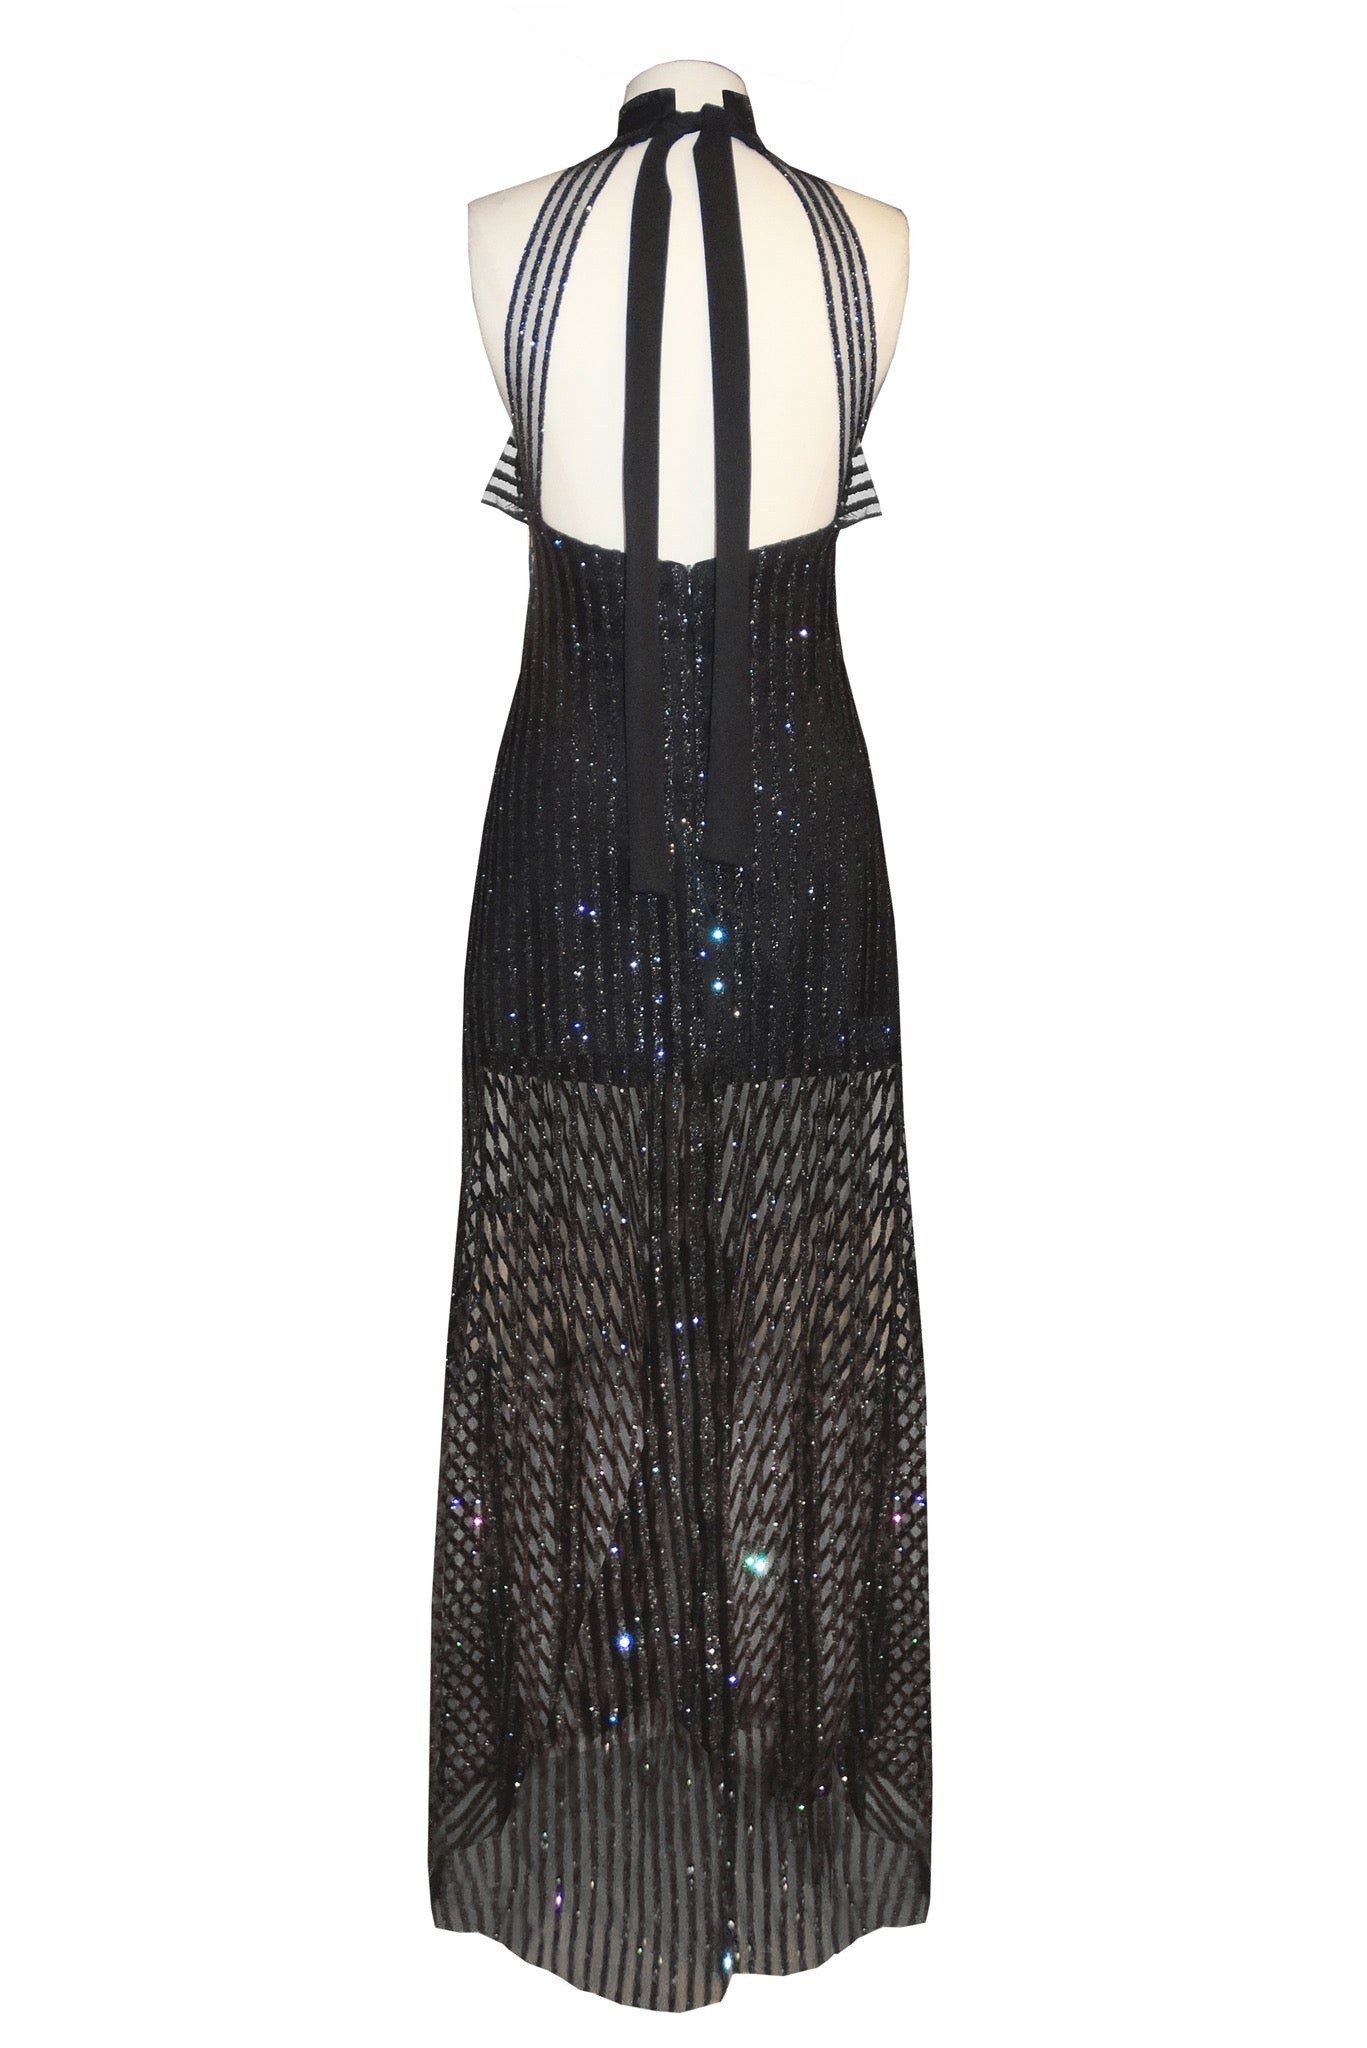 Halter maxi gown with glittery stripes mesh